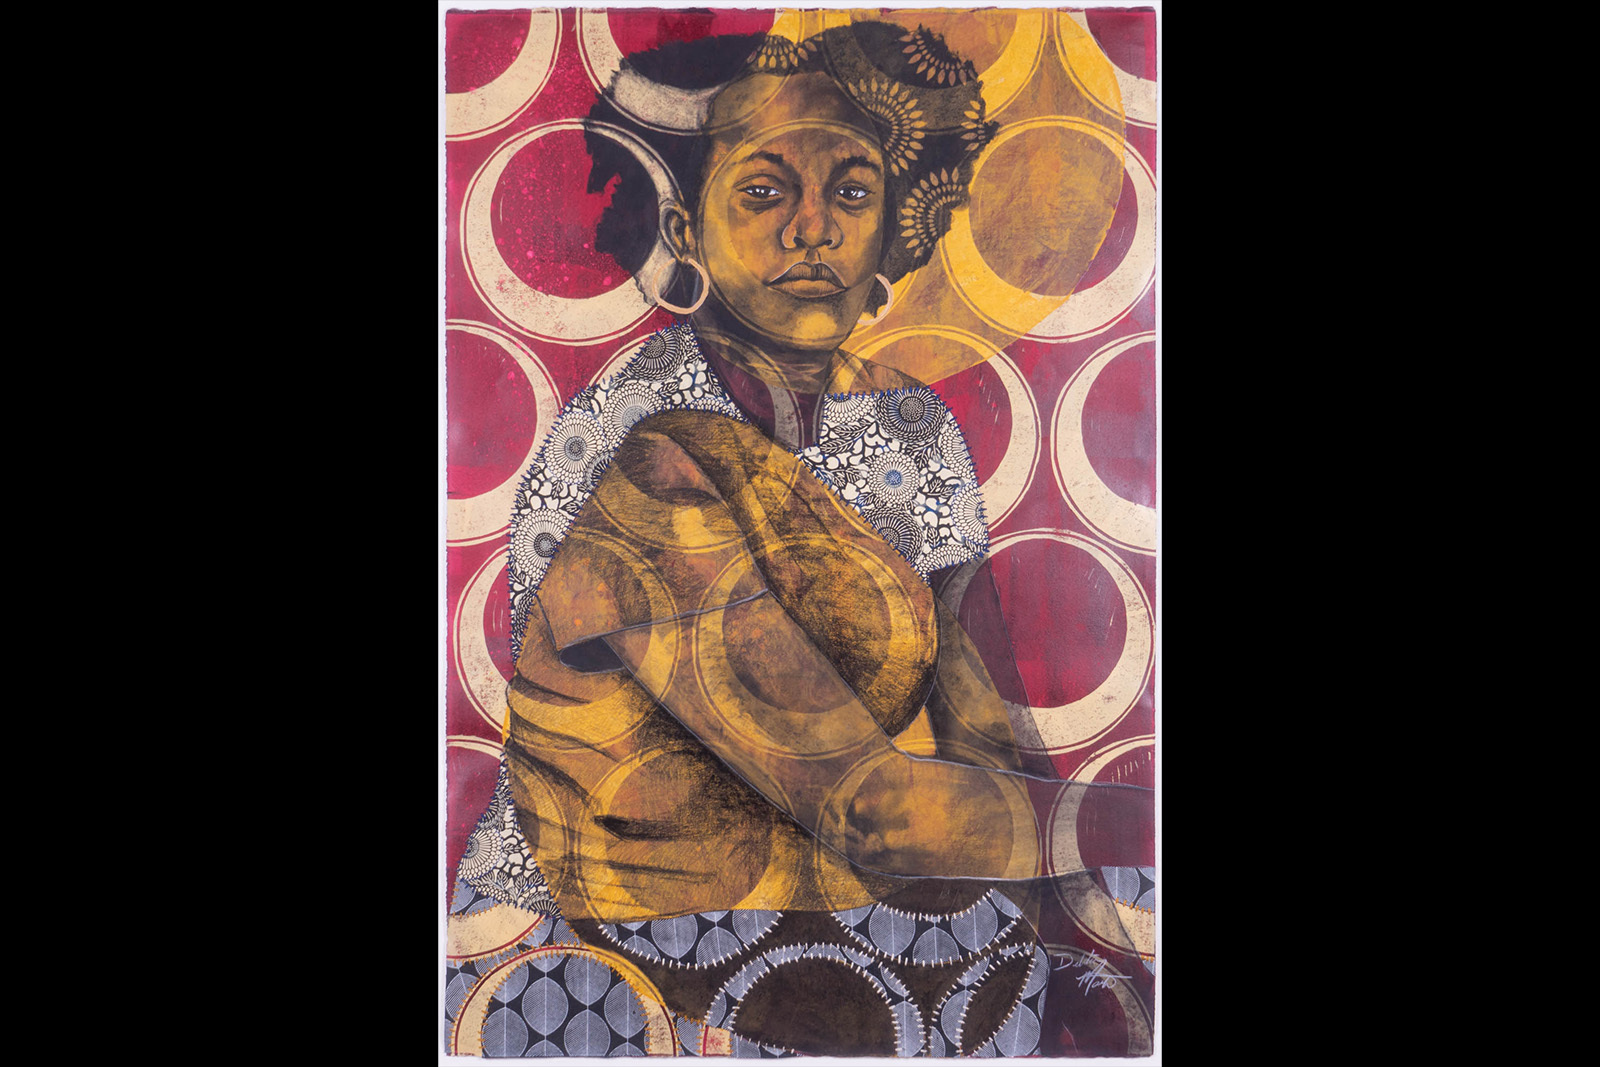 Delita Martin mixed media work redbird seated figure looking at the viewer on a yellow background